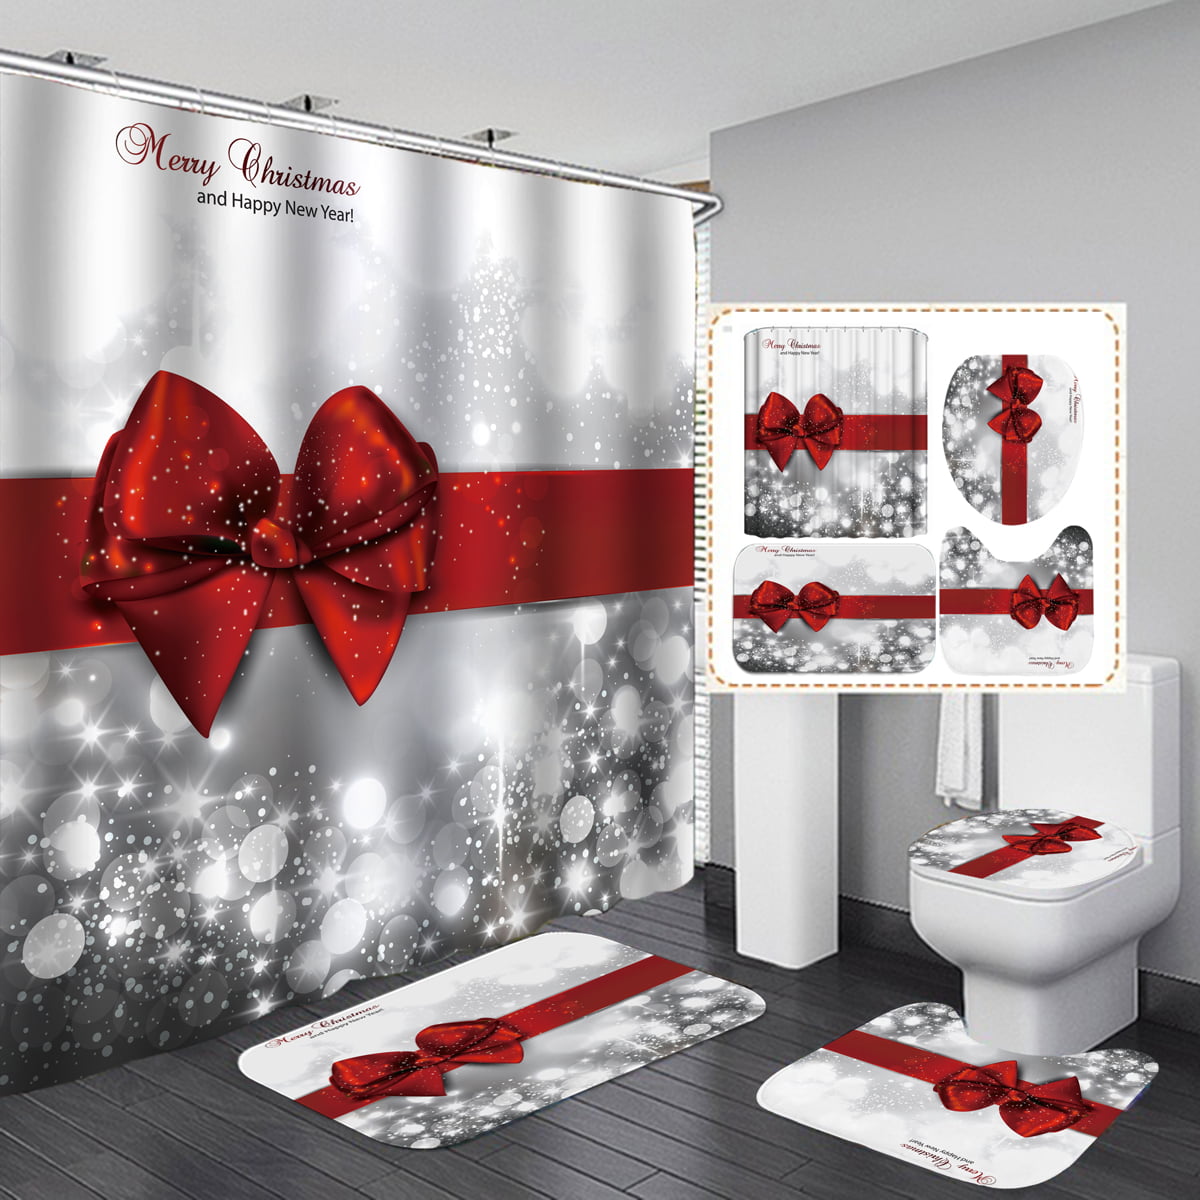 180x180cm Silver Shower Curtain Christmas Red Bow Knot